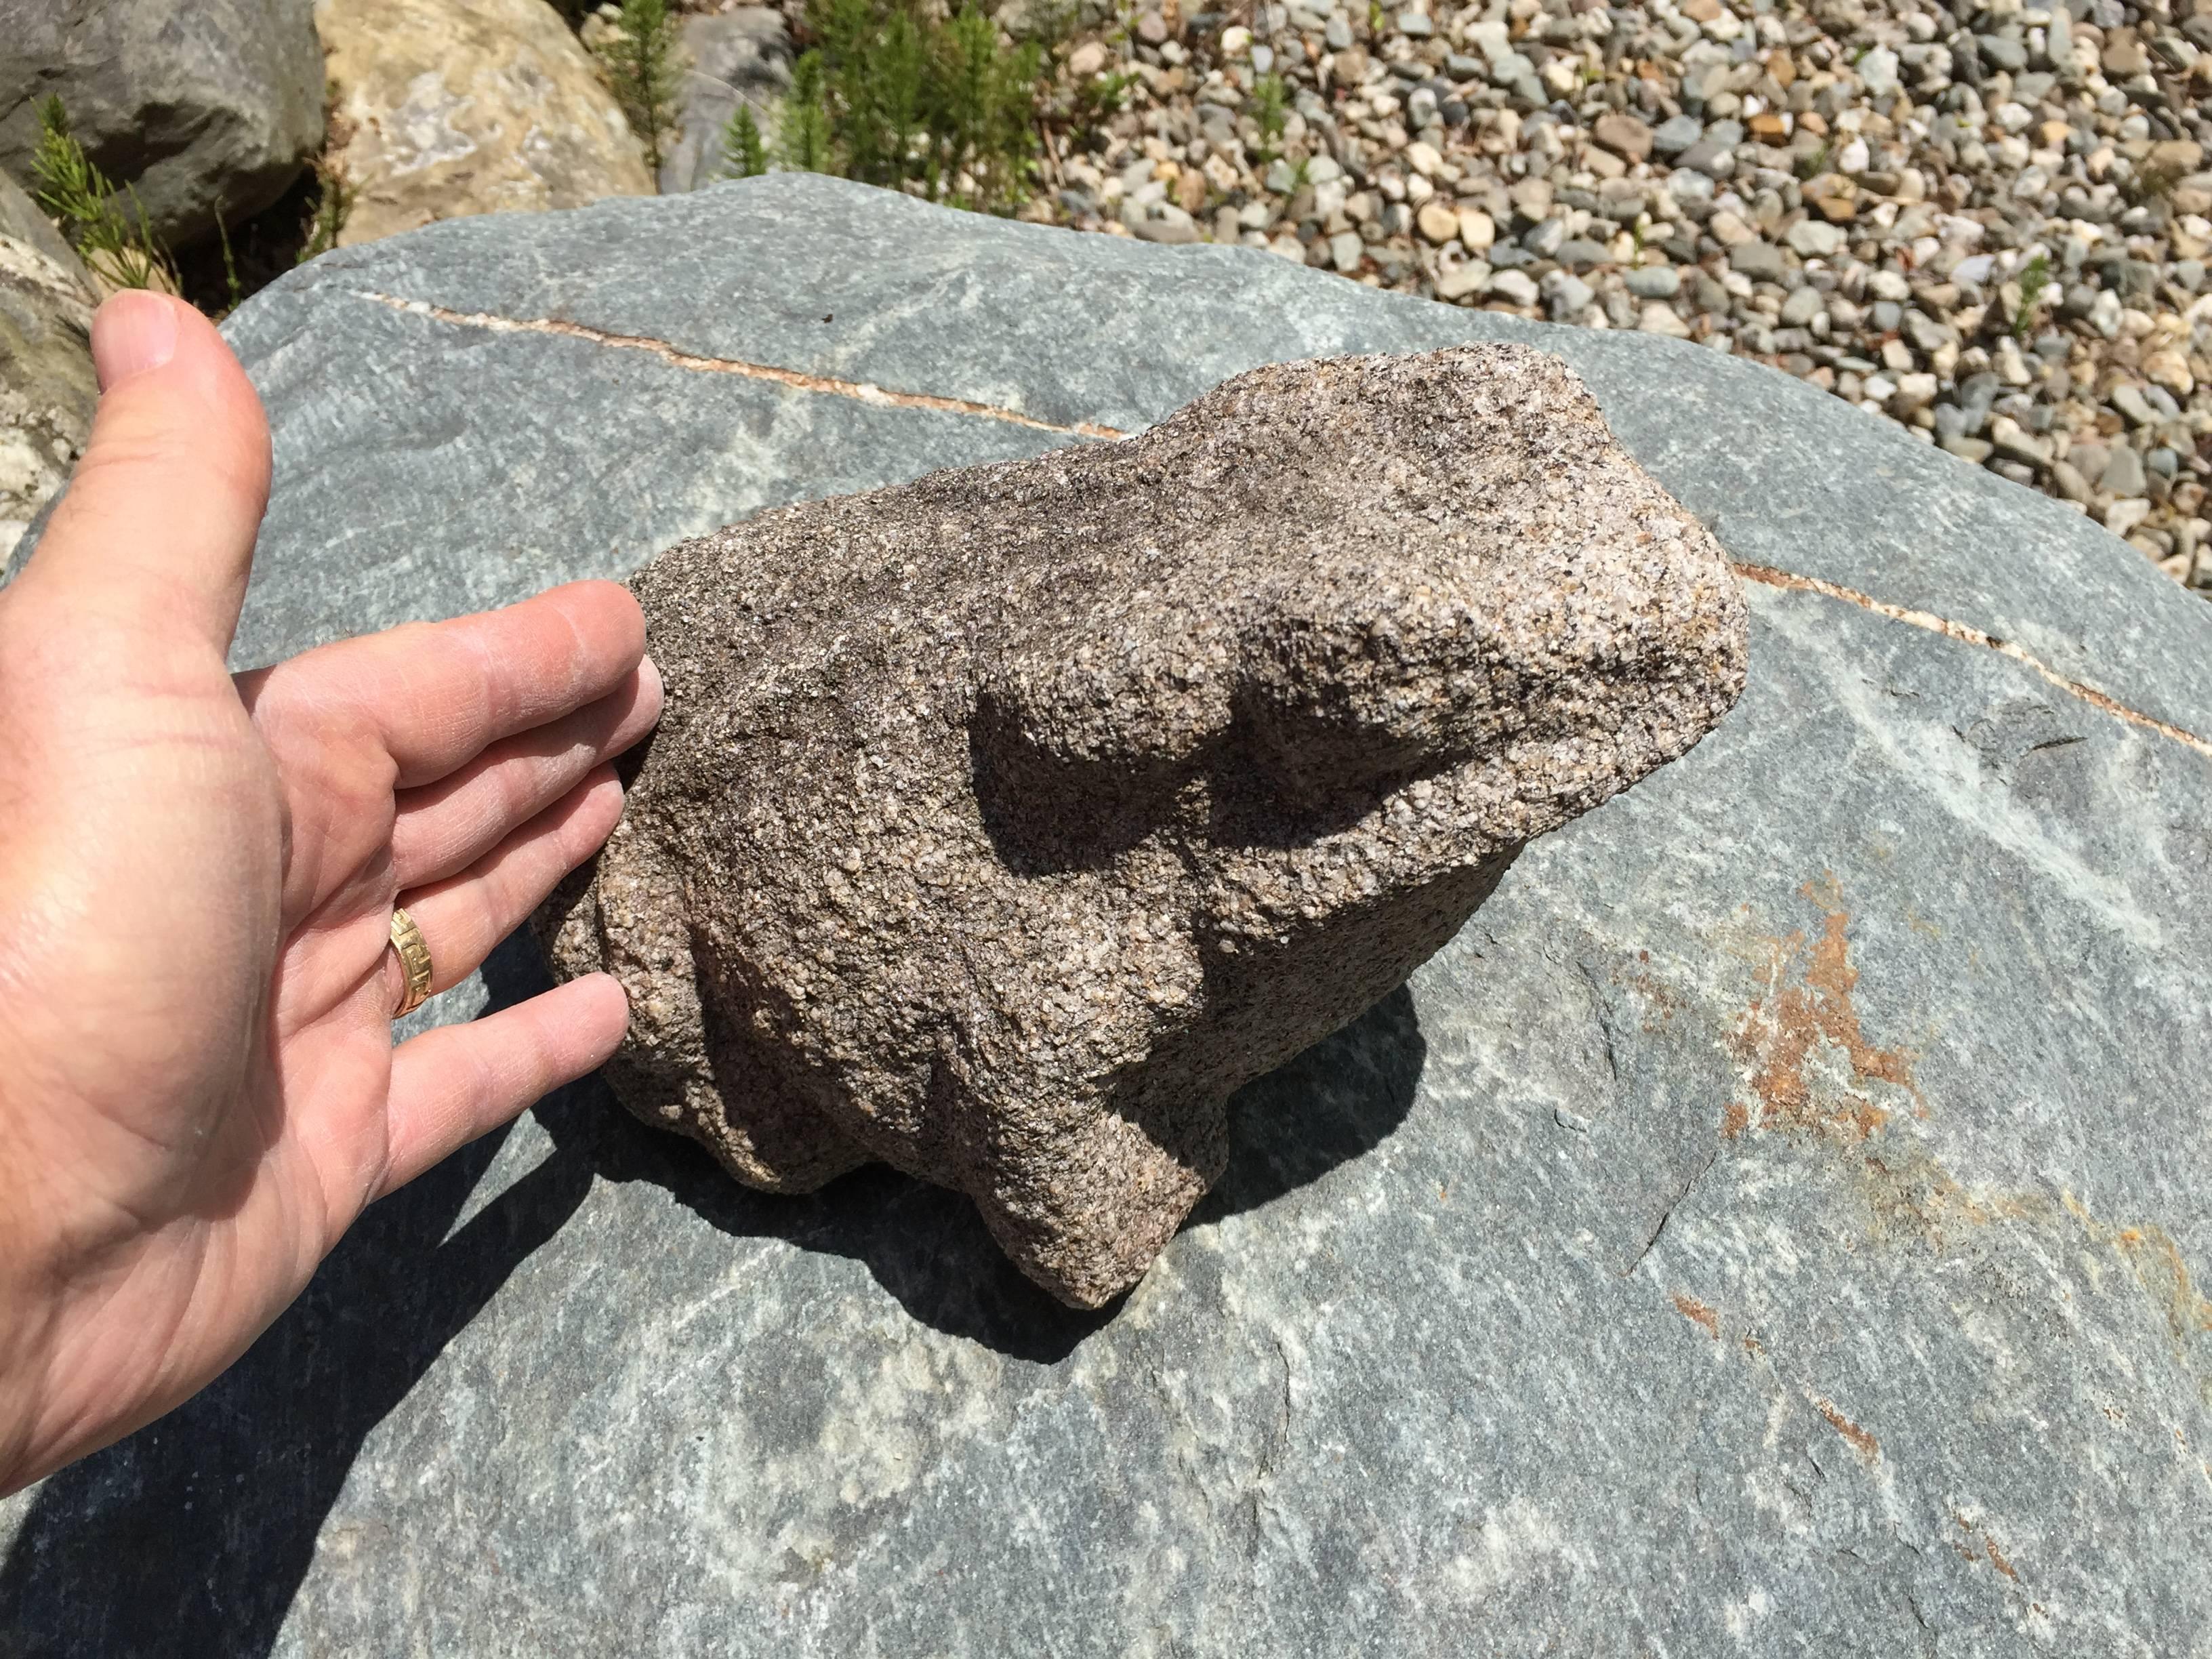 A delightful opportunity to acquire a rare Japanese hand-carved stone frog sculpture fresh from an old Nagoya Japan garden and dating to the 19th century. Look at the superb carving detail on his surfaces - a master work of a seasoned artisans